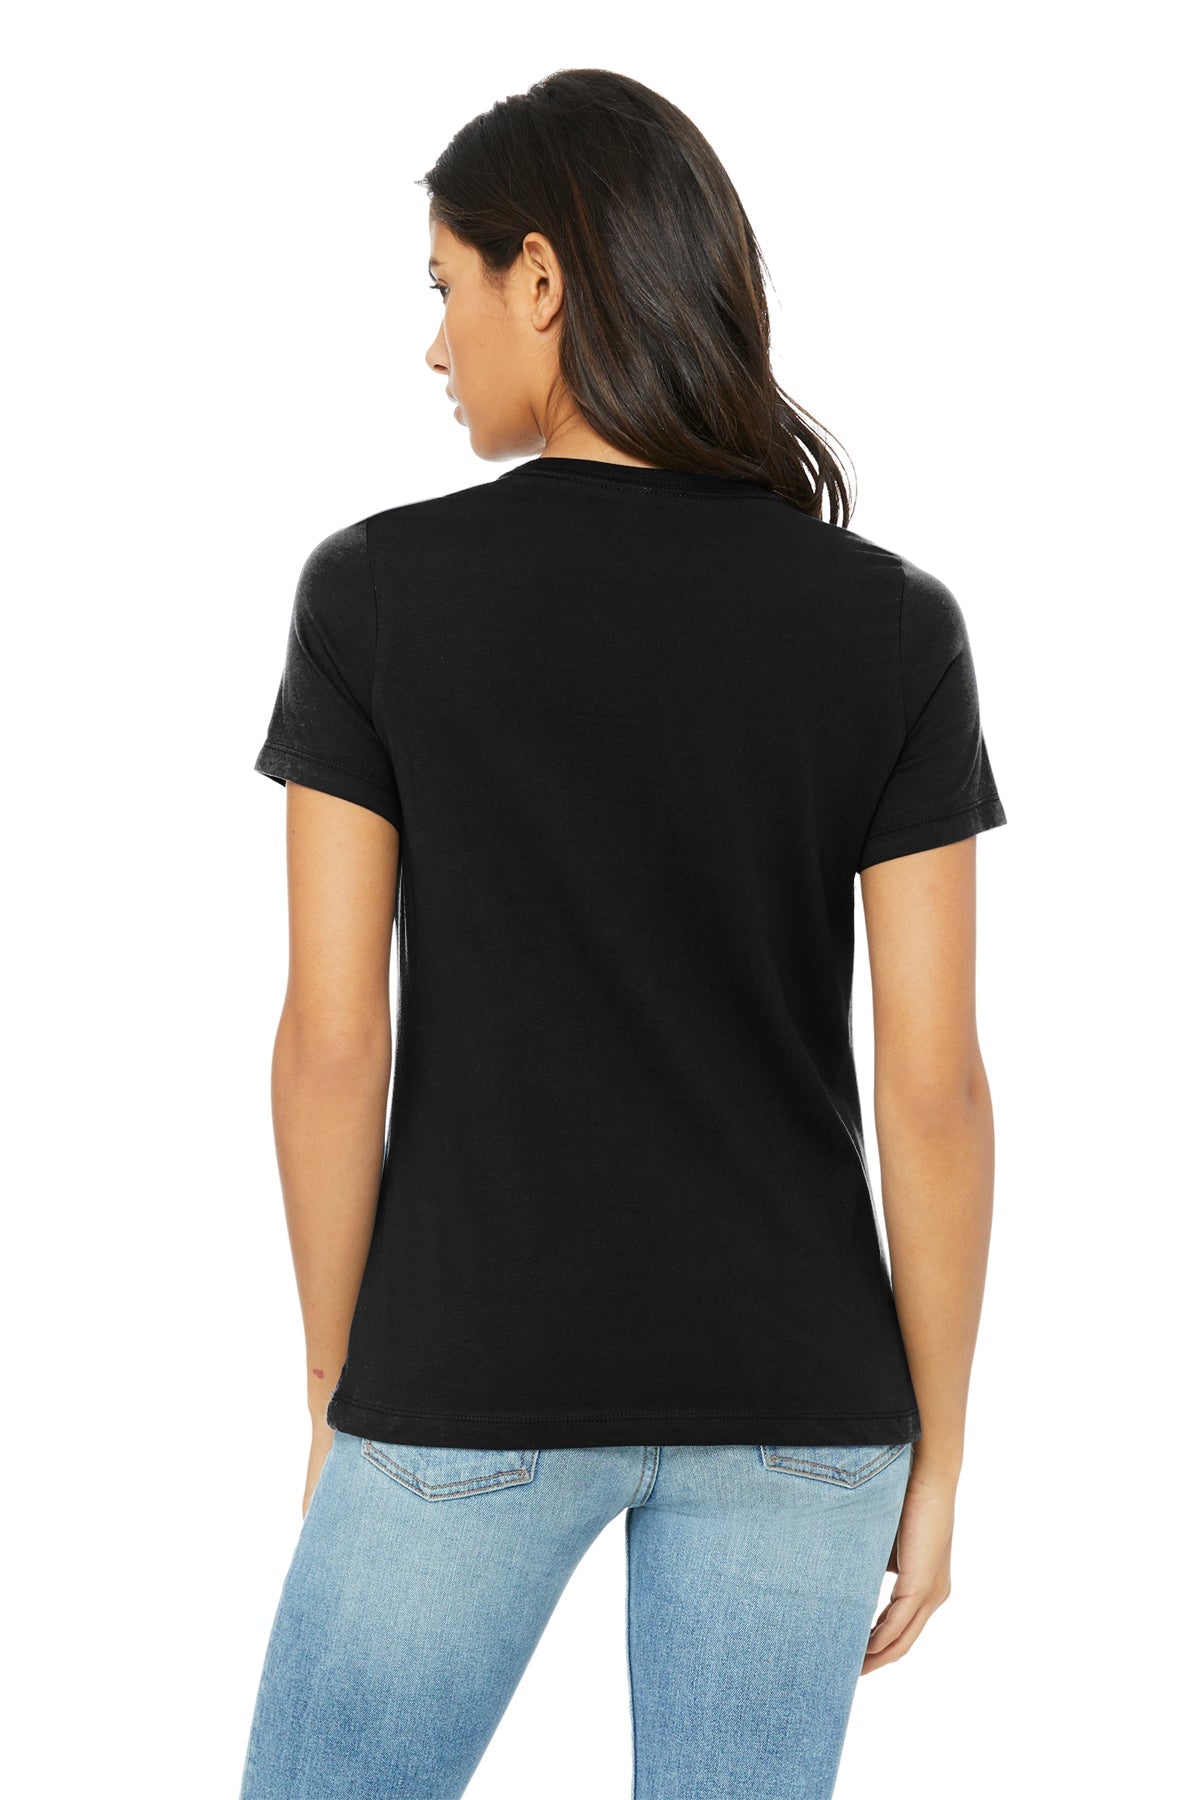 Bella Canvas Womens Relaxed Triblend T-Shirt, Solid Black